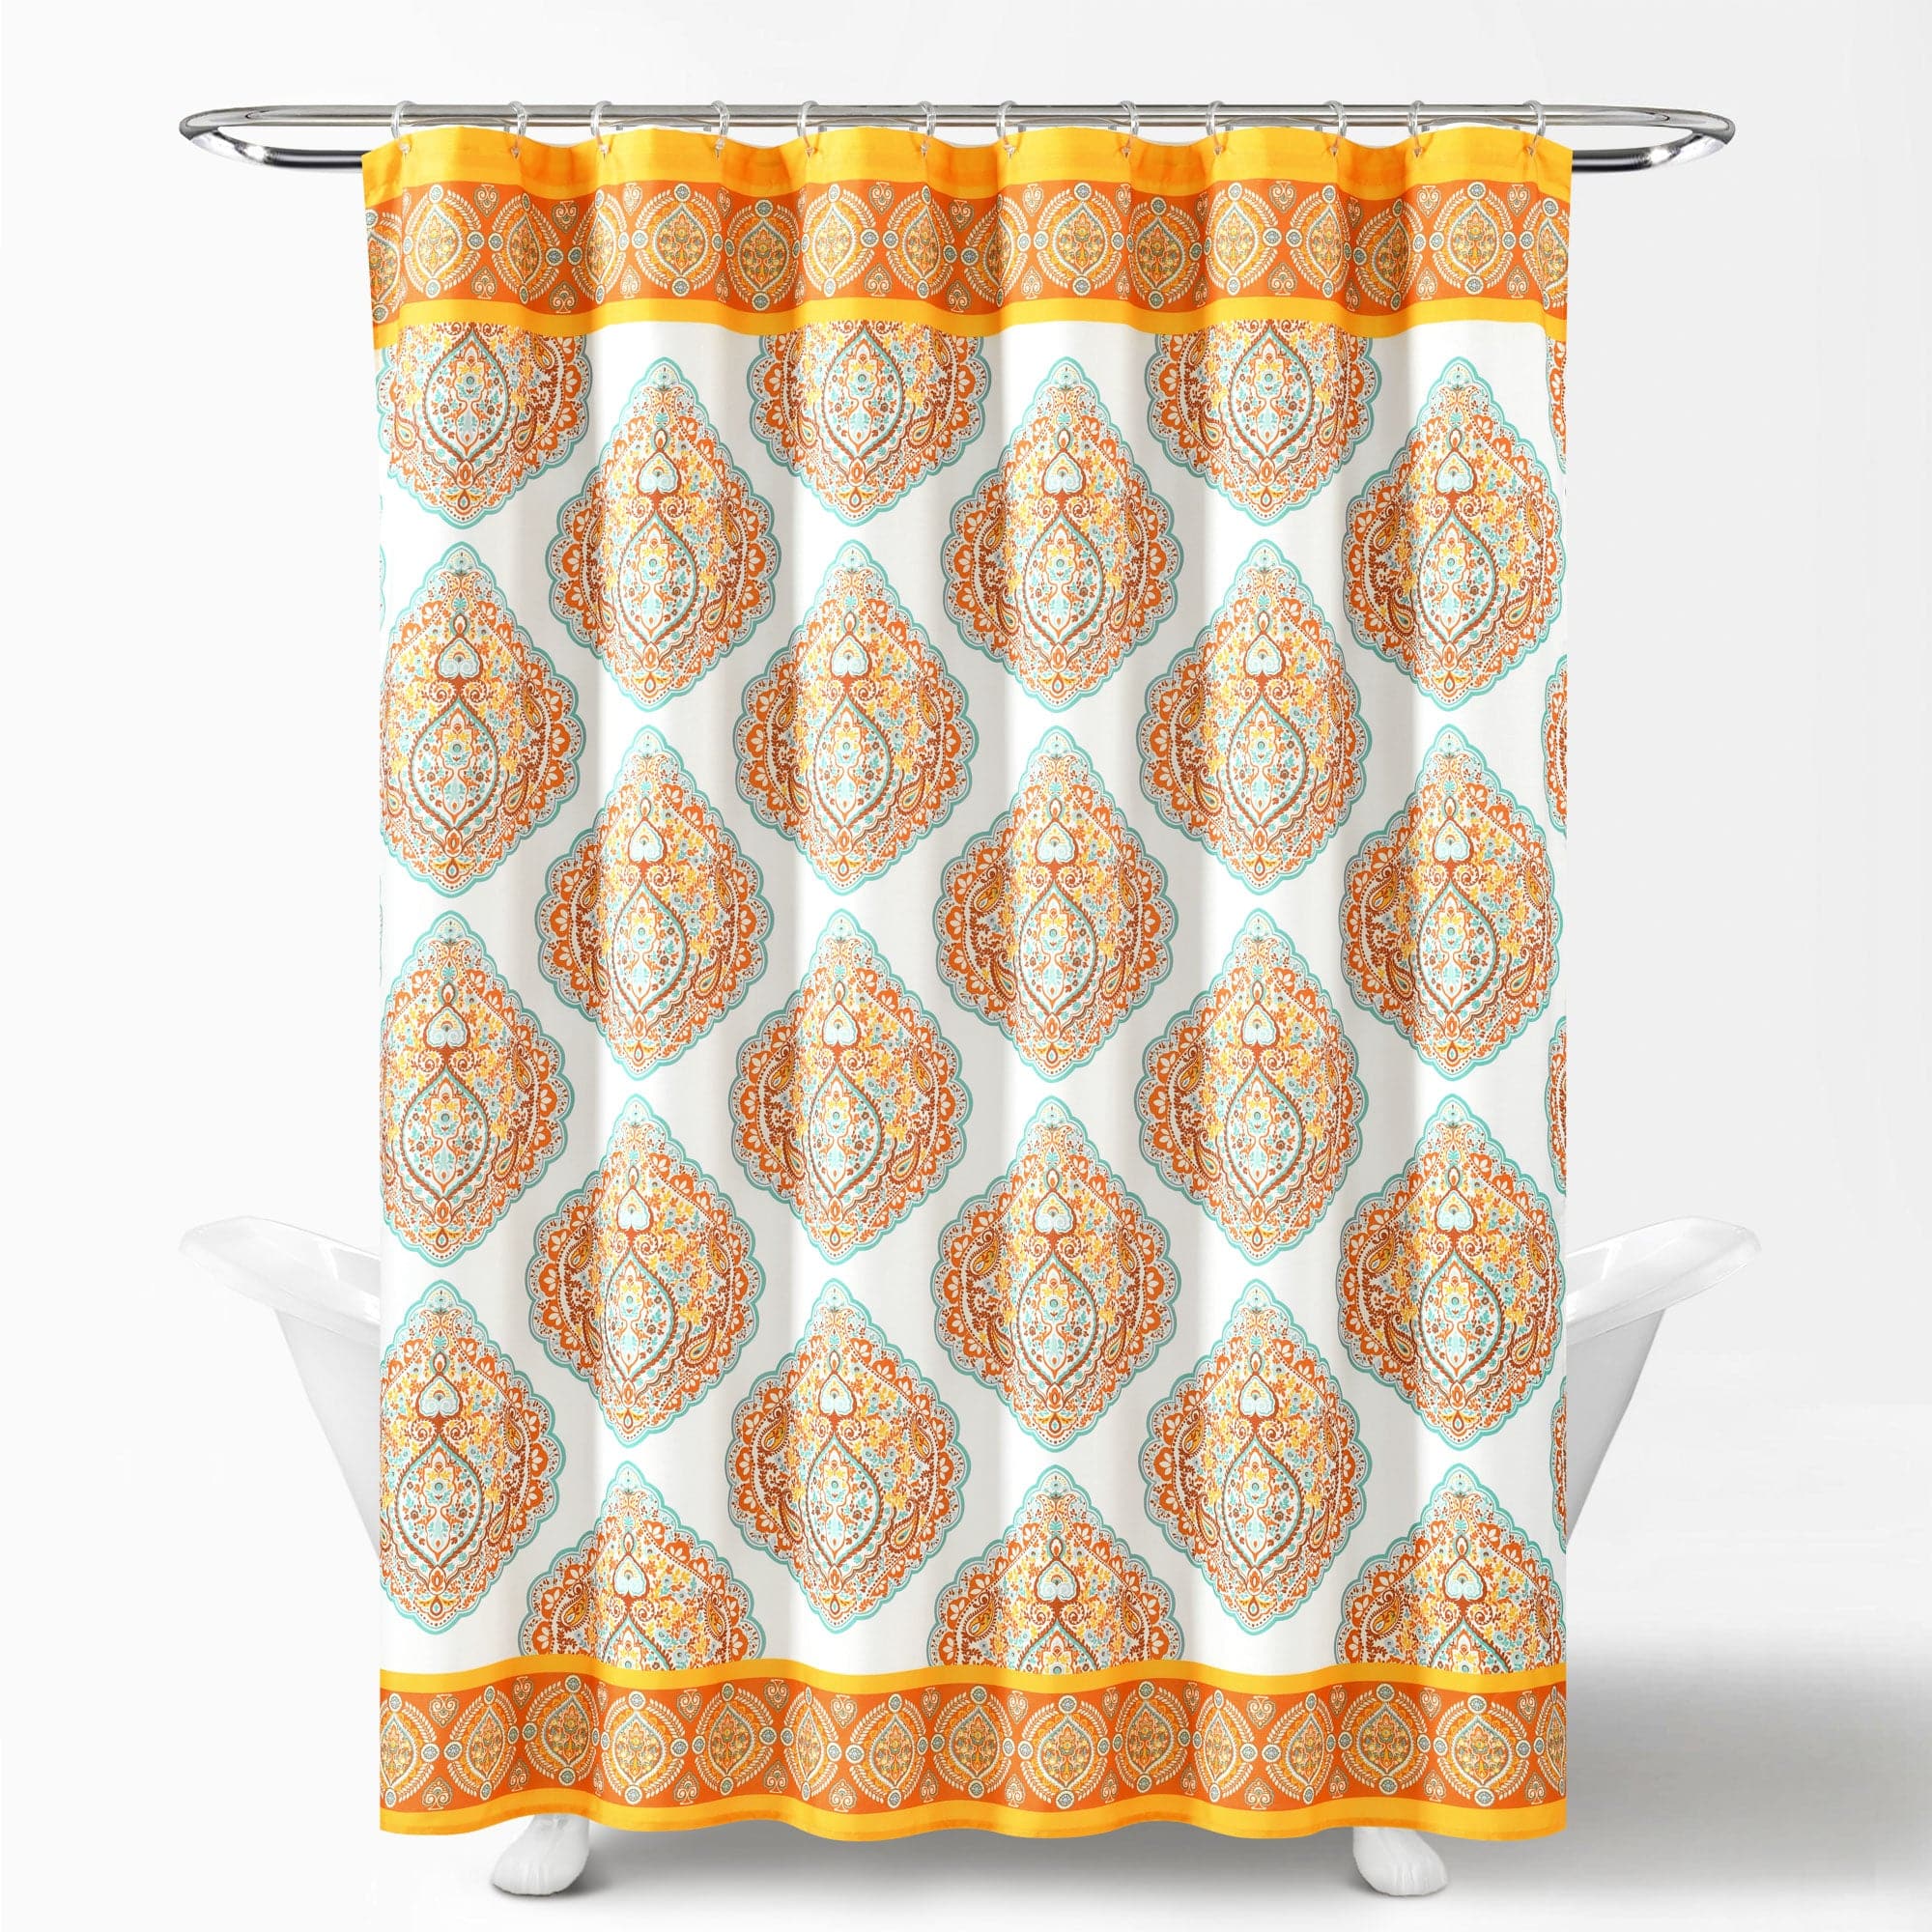 Tactical Plan Shower Curtain by Lvcandy 